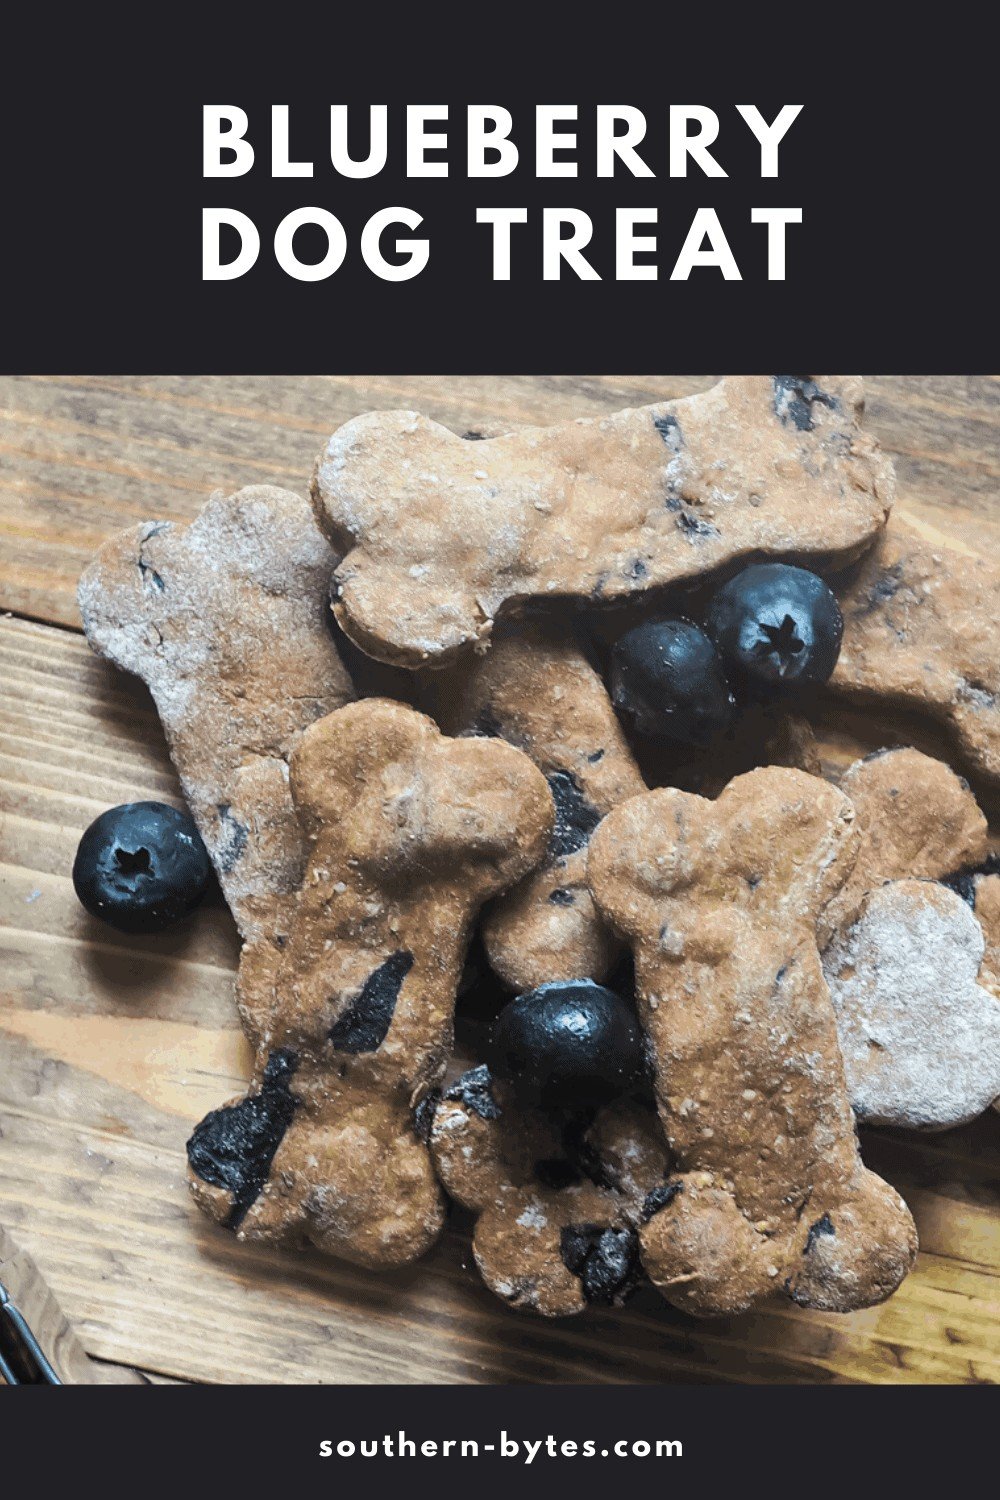 A pin image of a pile of blueberry dog treats and blueberries on a wooden background.